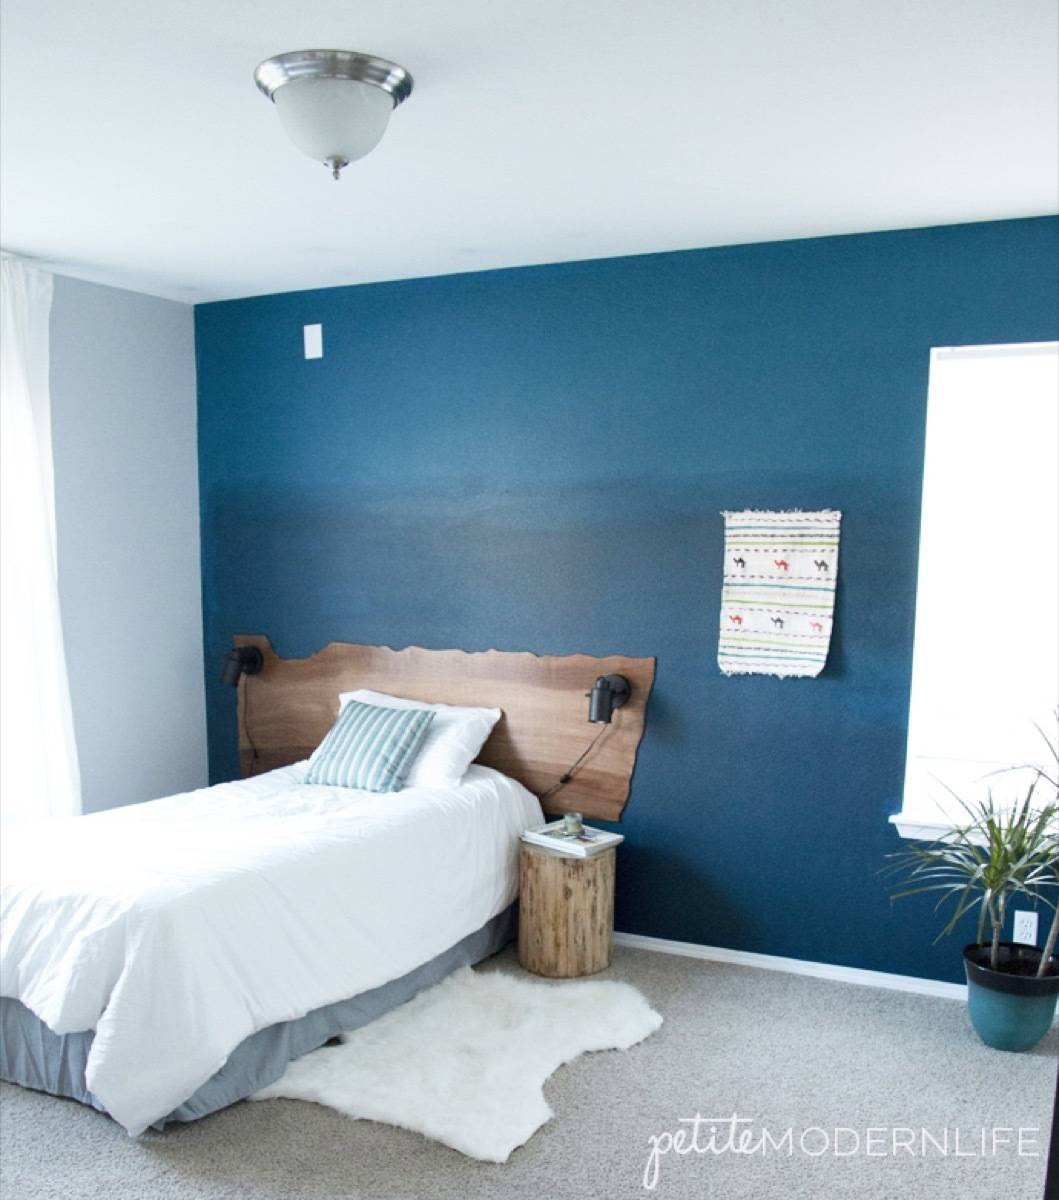 Blue and white bedroom with sheepskin rug on carpeted floor